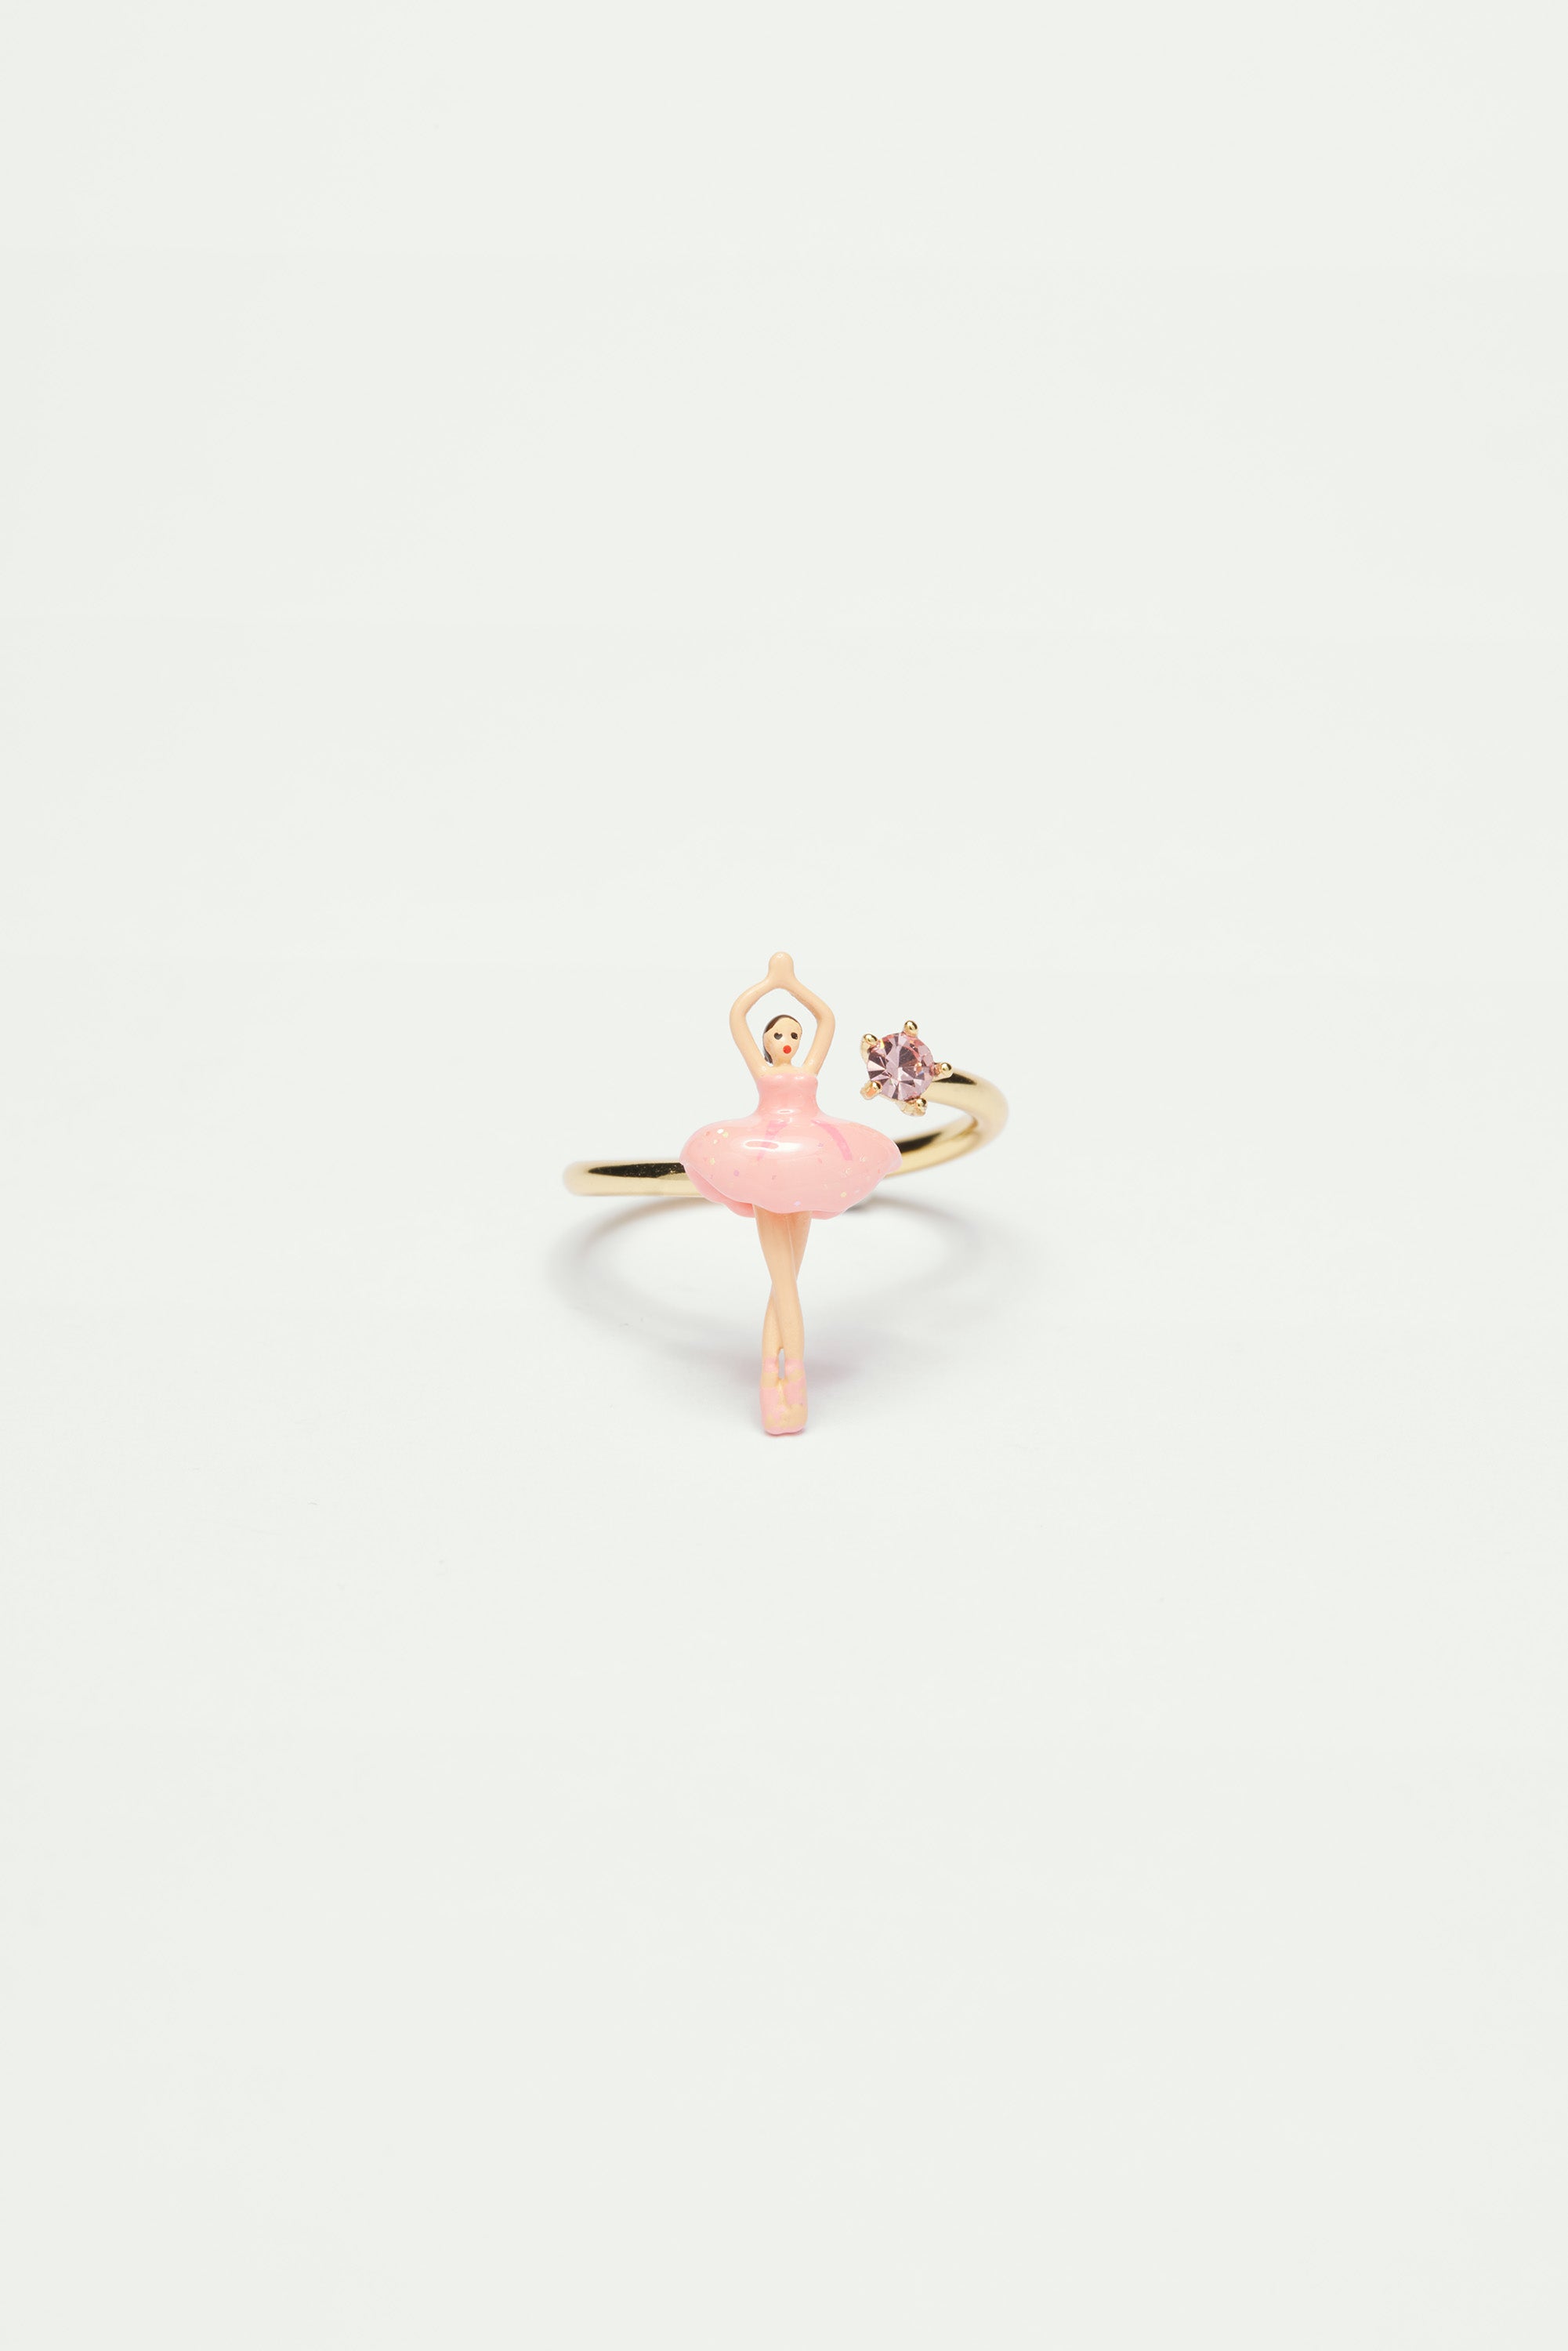 Adjustable ring with mini ballerina in a pink tutu